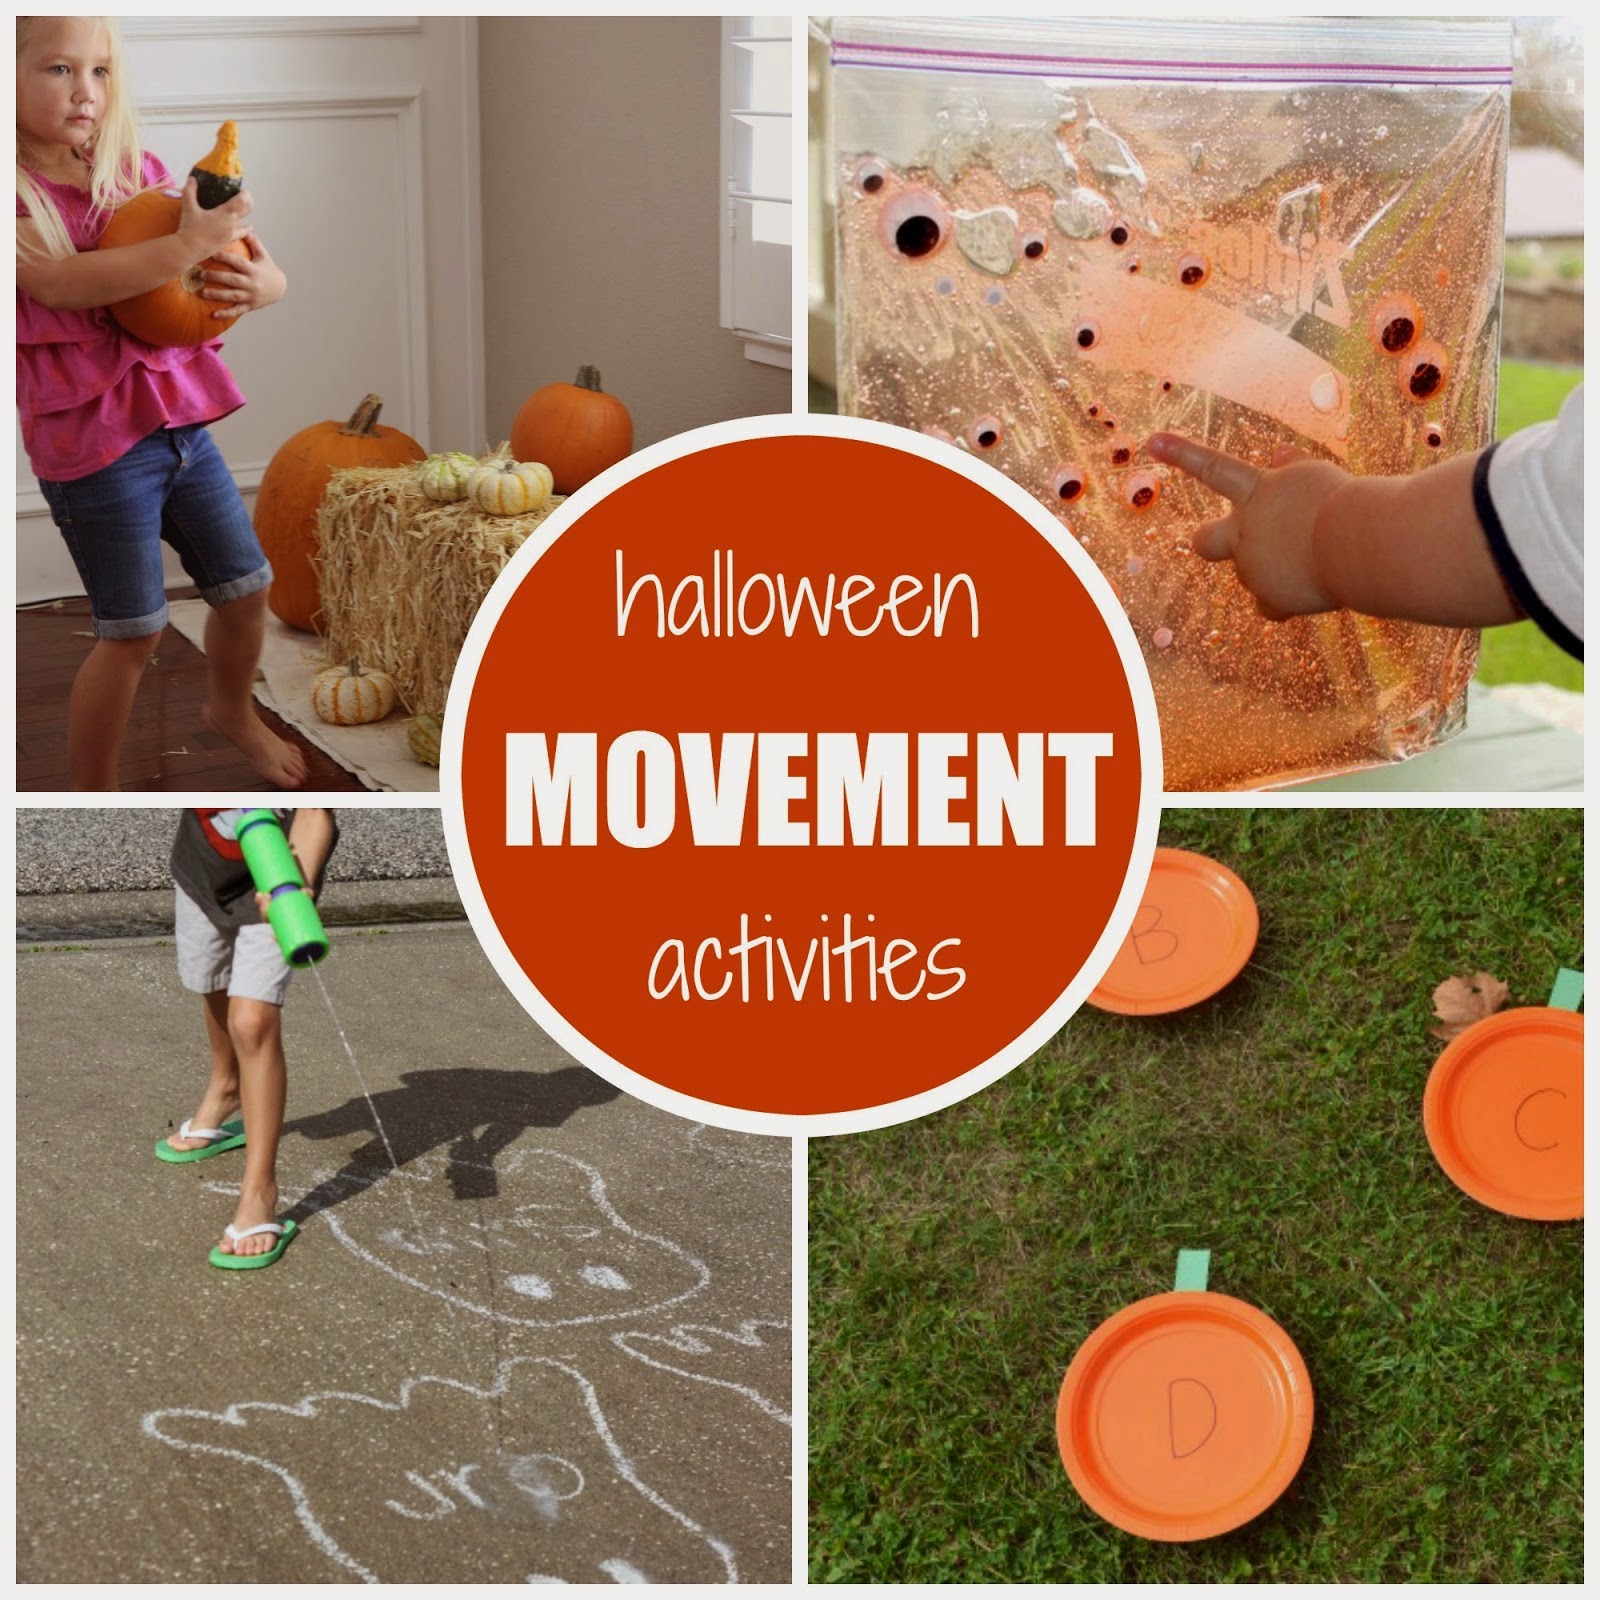 http://www.toddlerapproved.com/2014/10/halloween-themed-movement-activities.html?m=1